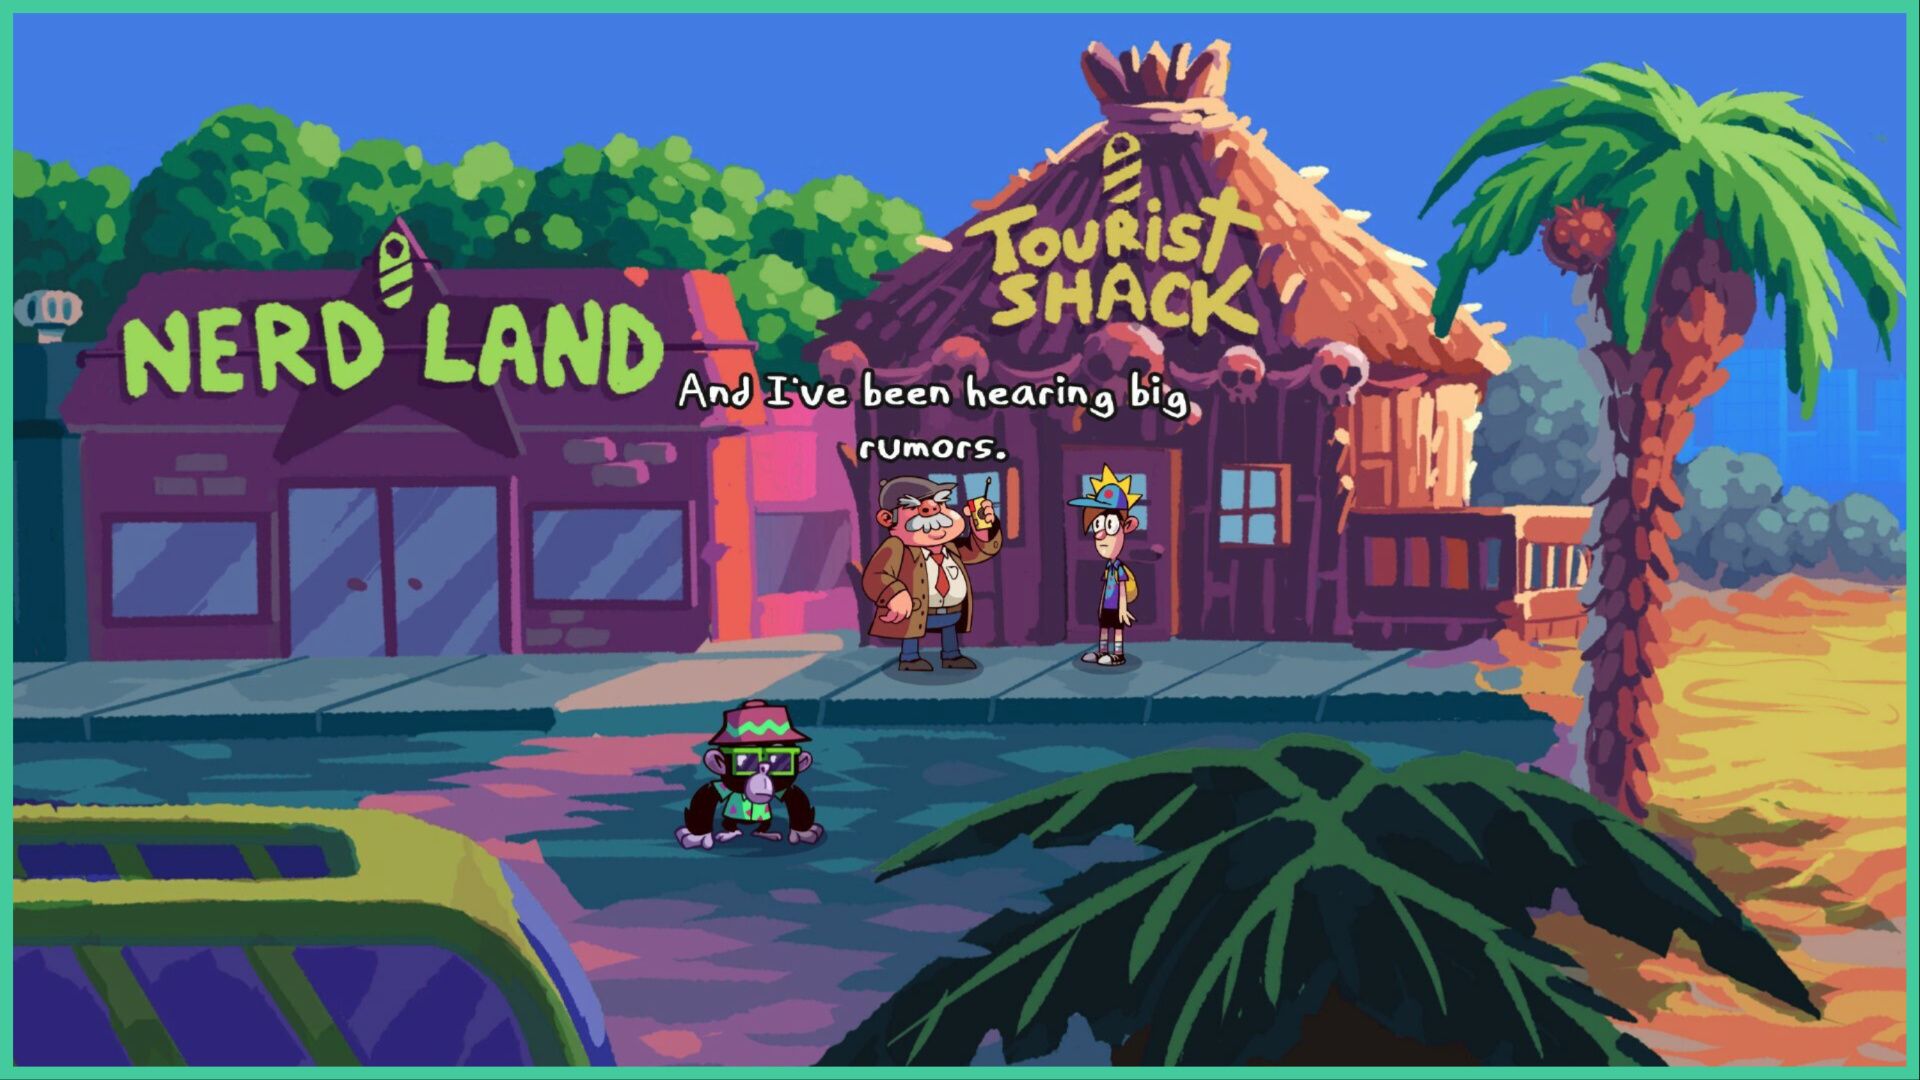 feature image for our tourist trap release news, the image features a screenshot from the game of the location outside of two shops by the coast called "nerd land" and "tourist shack". lucas, the main character, is talking to a resident who is saying "and i've been hearing big rumours" as the talking monkey stands close by wearing holiday clothes and sunglasses